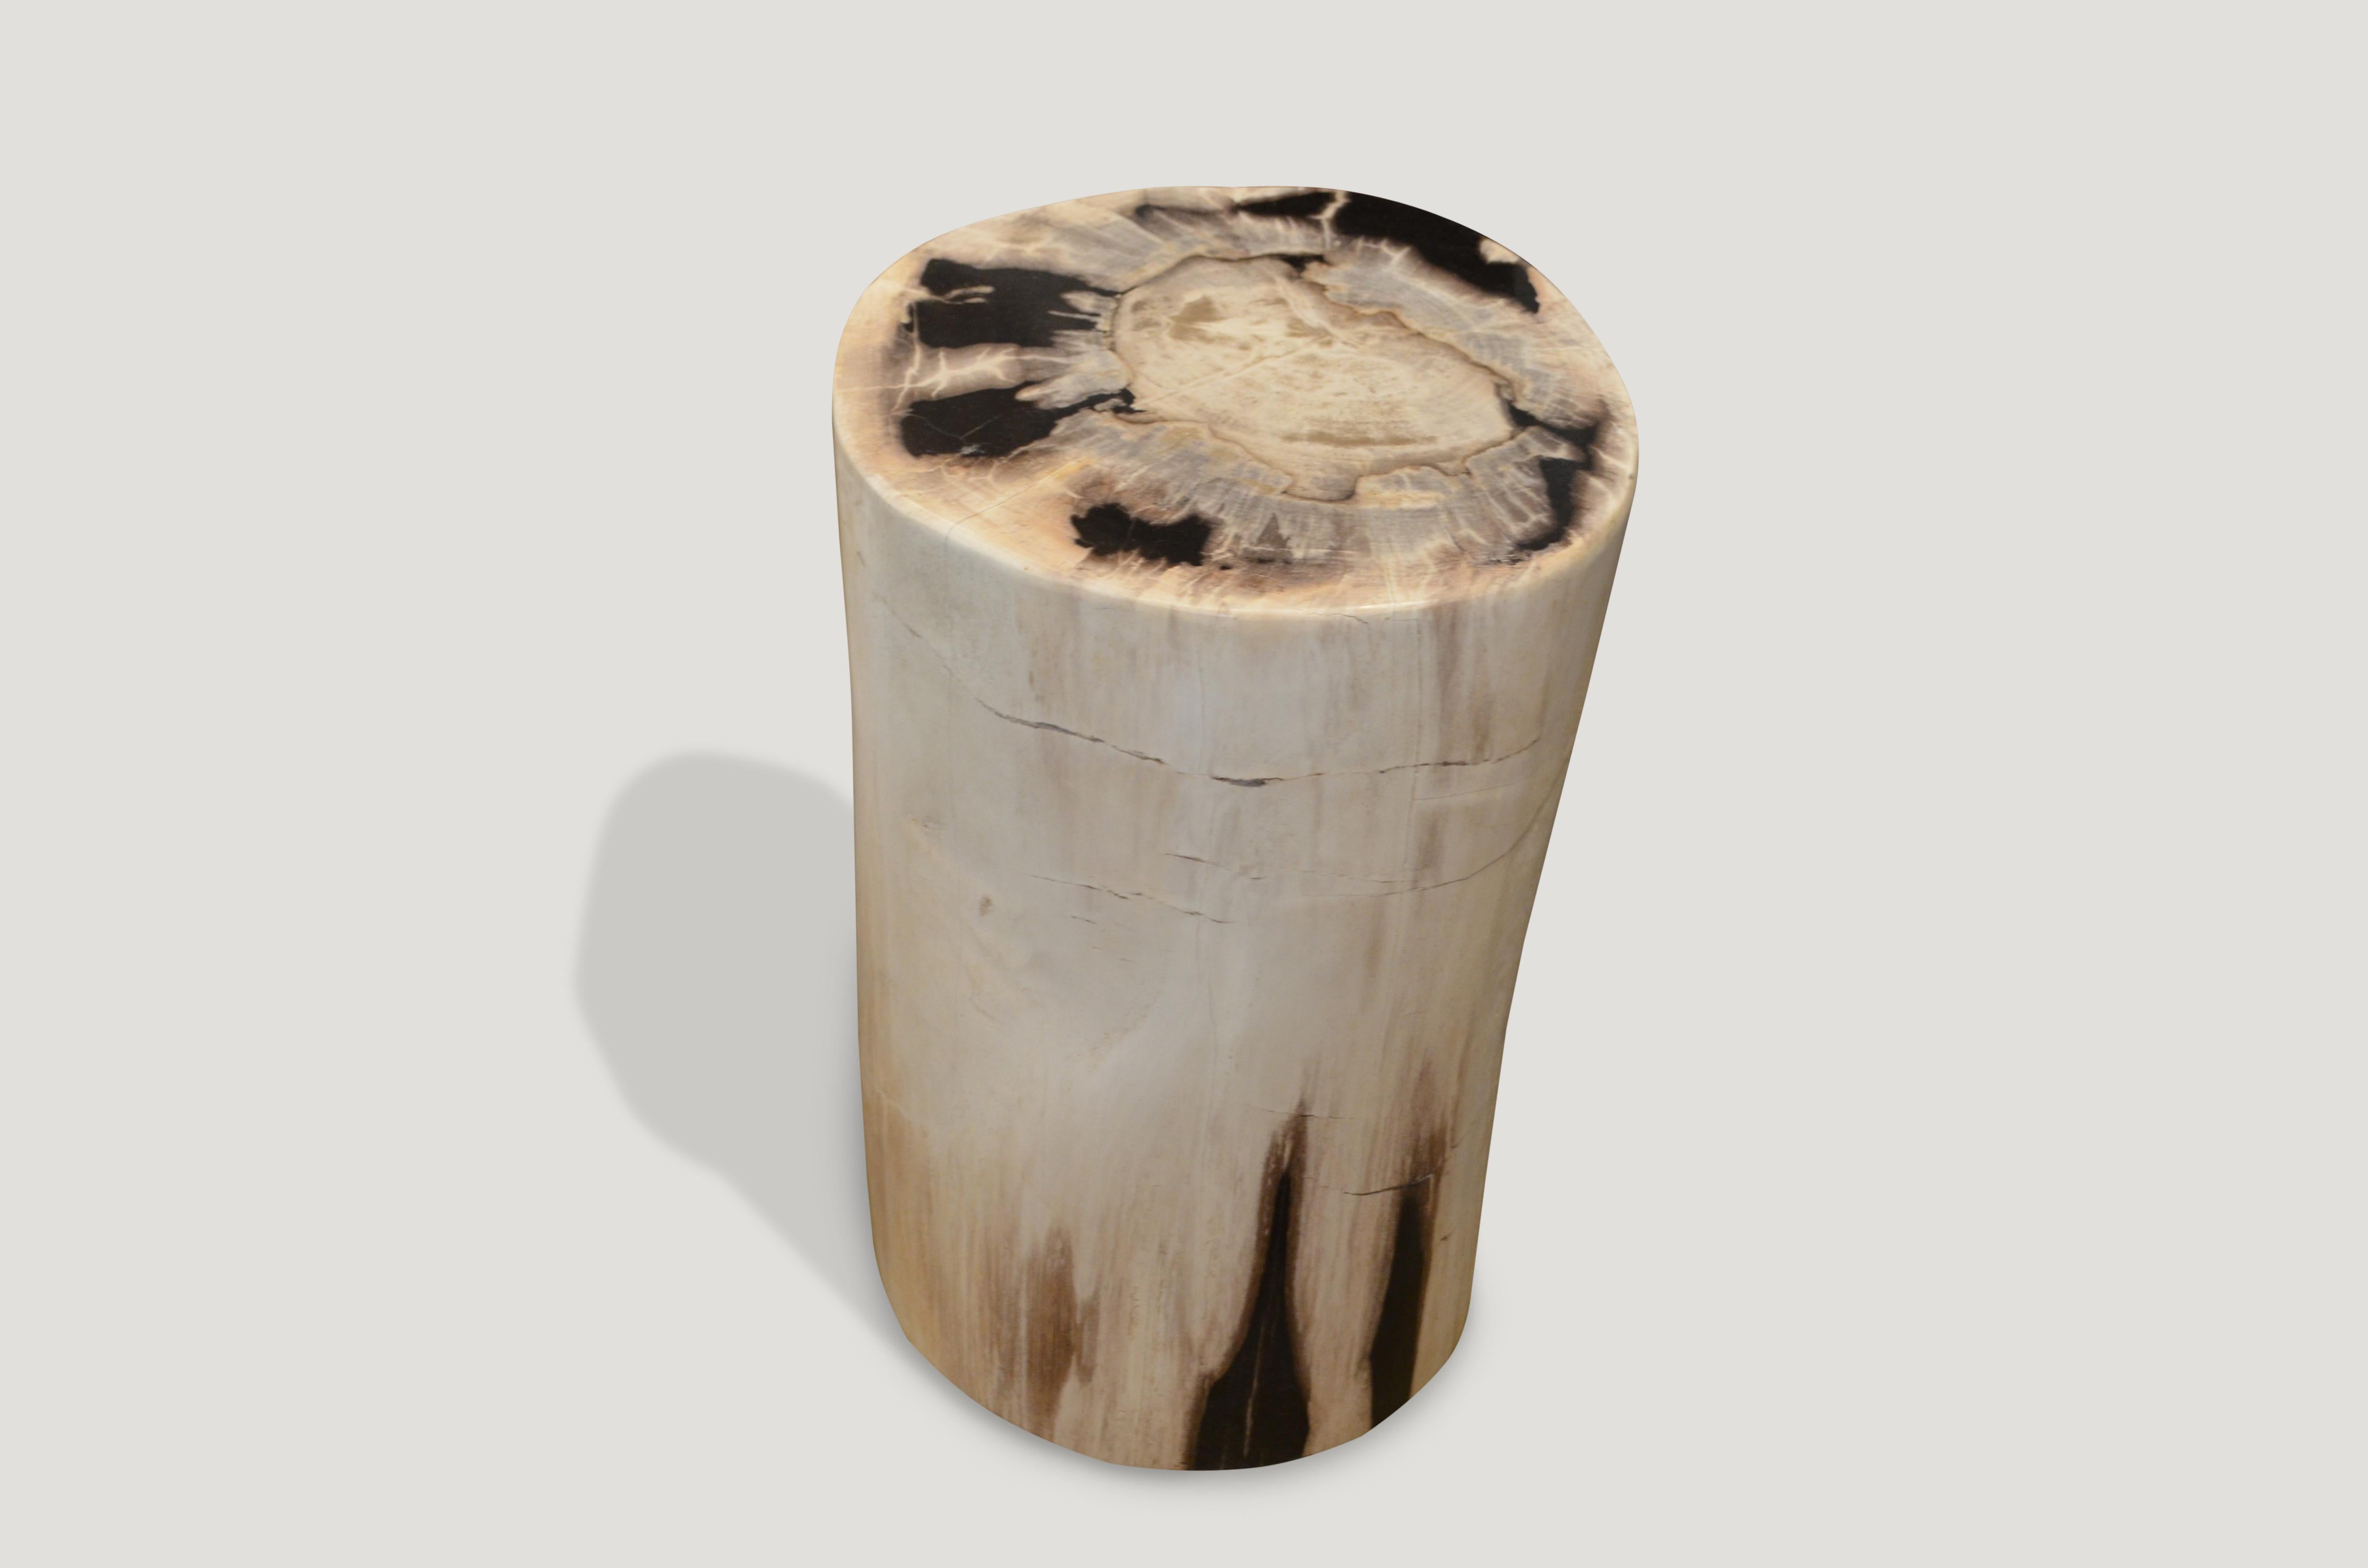 Stunning contrasting black and white toned petrified wood side table or stool. We source the highest quality petrified wood available. Each piece is hand-selected and highly polished with minimal cracks. Petrified wood is extremely versatile even